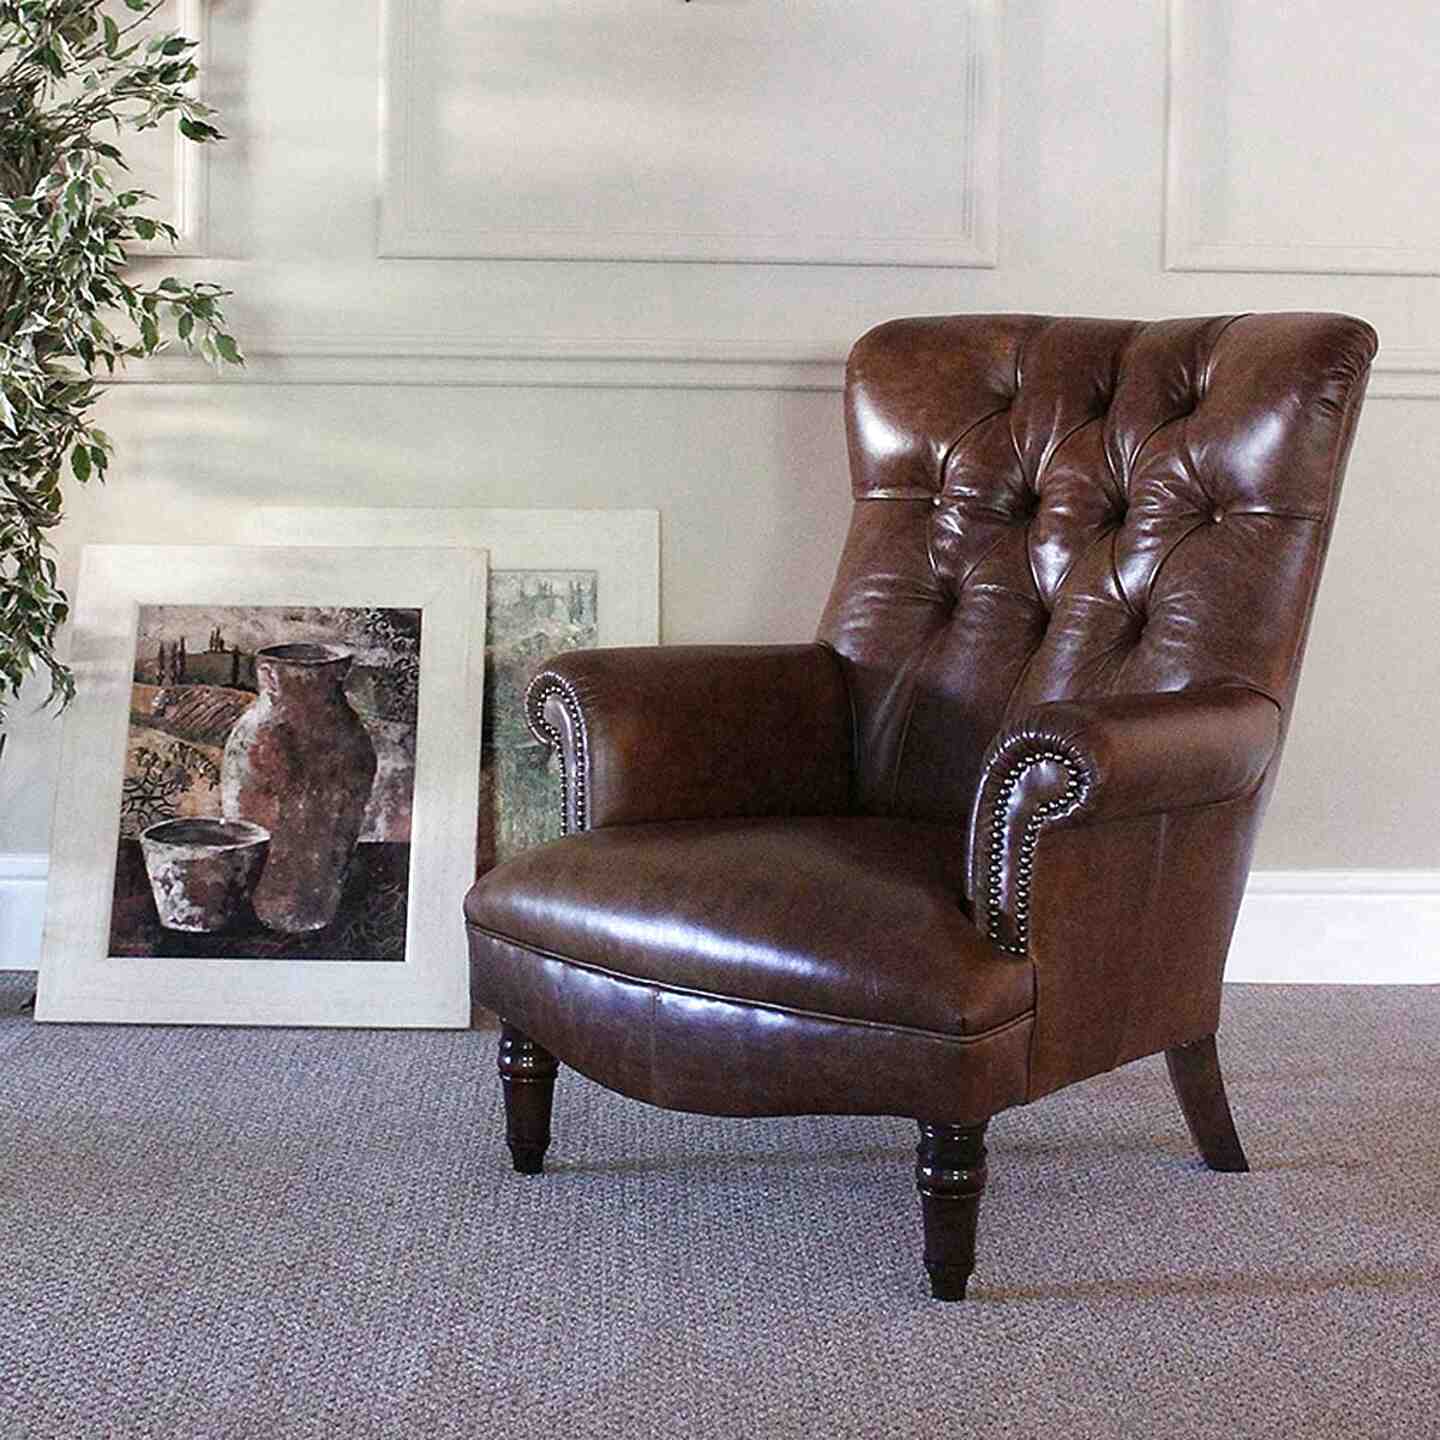 Tetrad Leather Chair for sale in UK | View 22 bargains